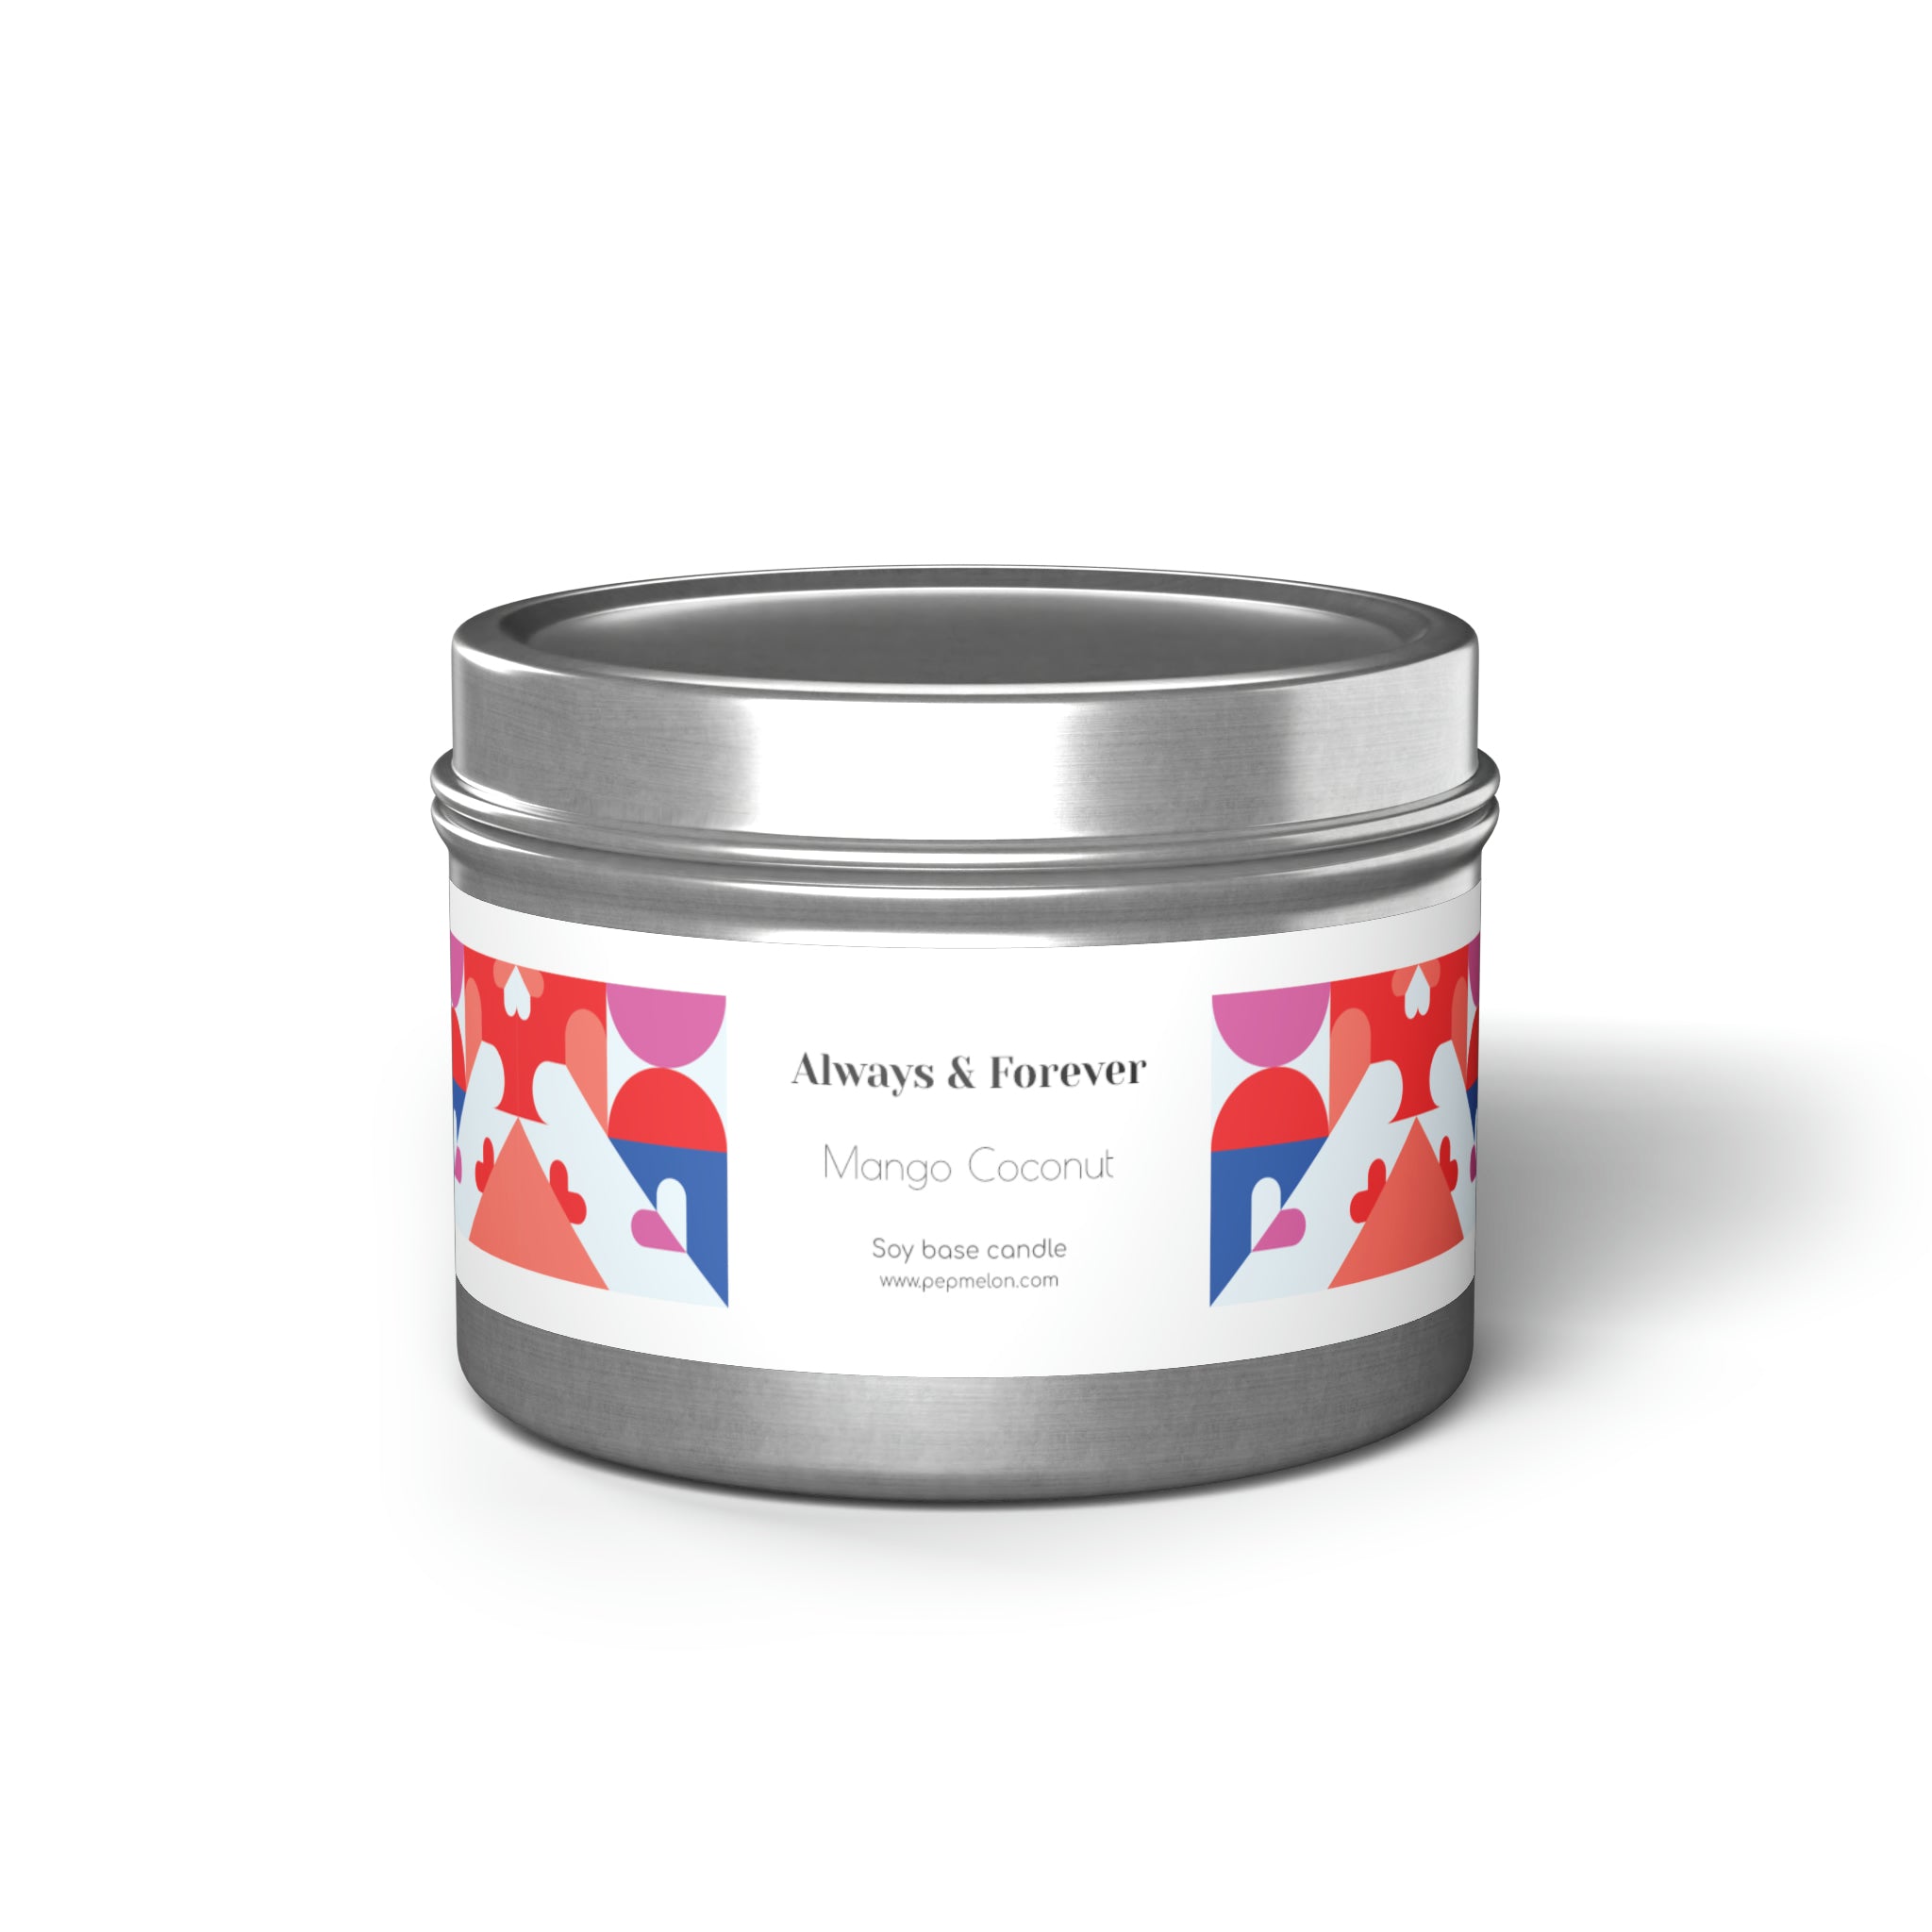 Mango coconut Always & Forever Soy base candle love, valentine's day gift Tin Candles-10